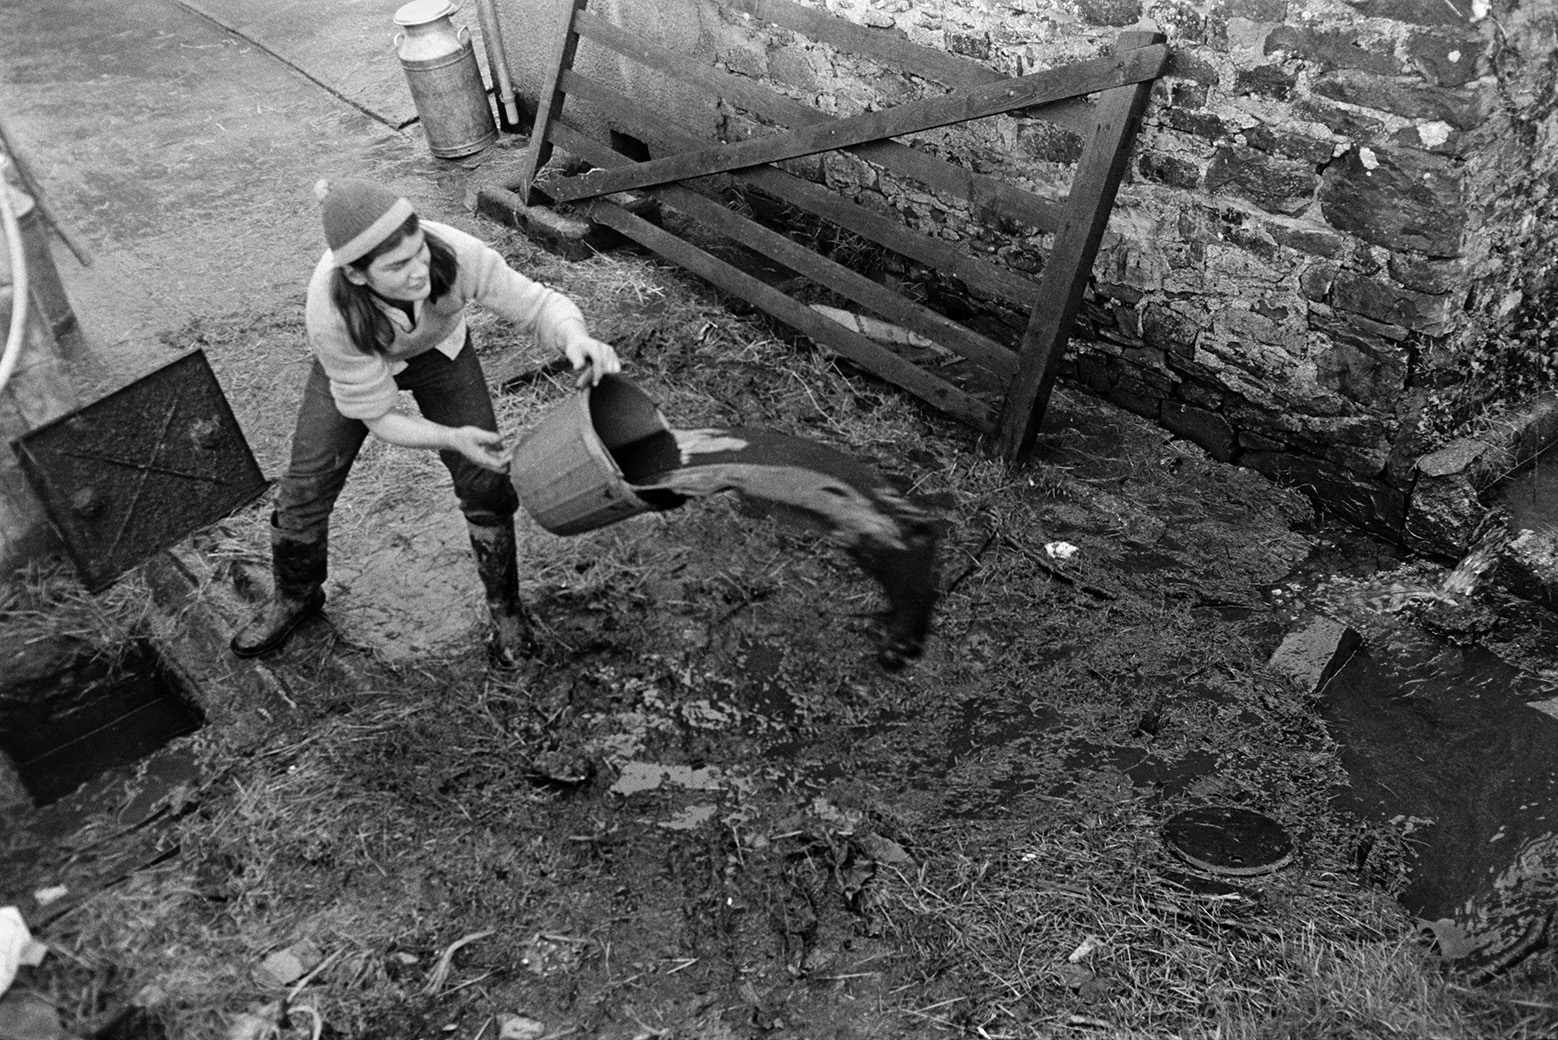 Derek Bright emptying a bucket in the farmyard at Mill Road Farm, Beaford. He is stood next to an open manhole or drain. A wooden field gate is lent by a milk churn and a stone building in the background. The farm was also known as Jeffrys.